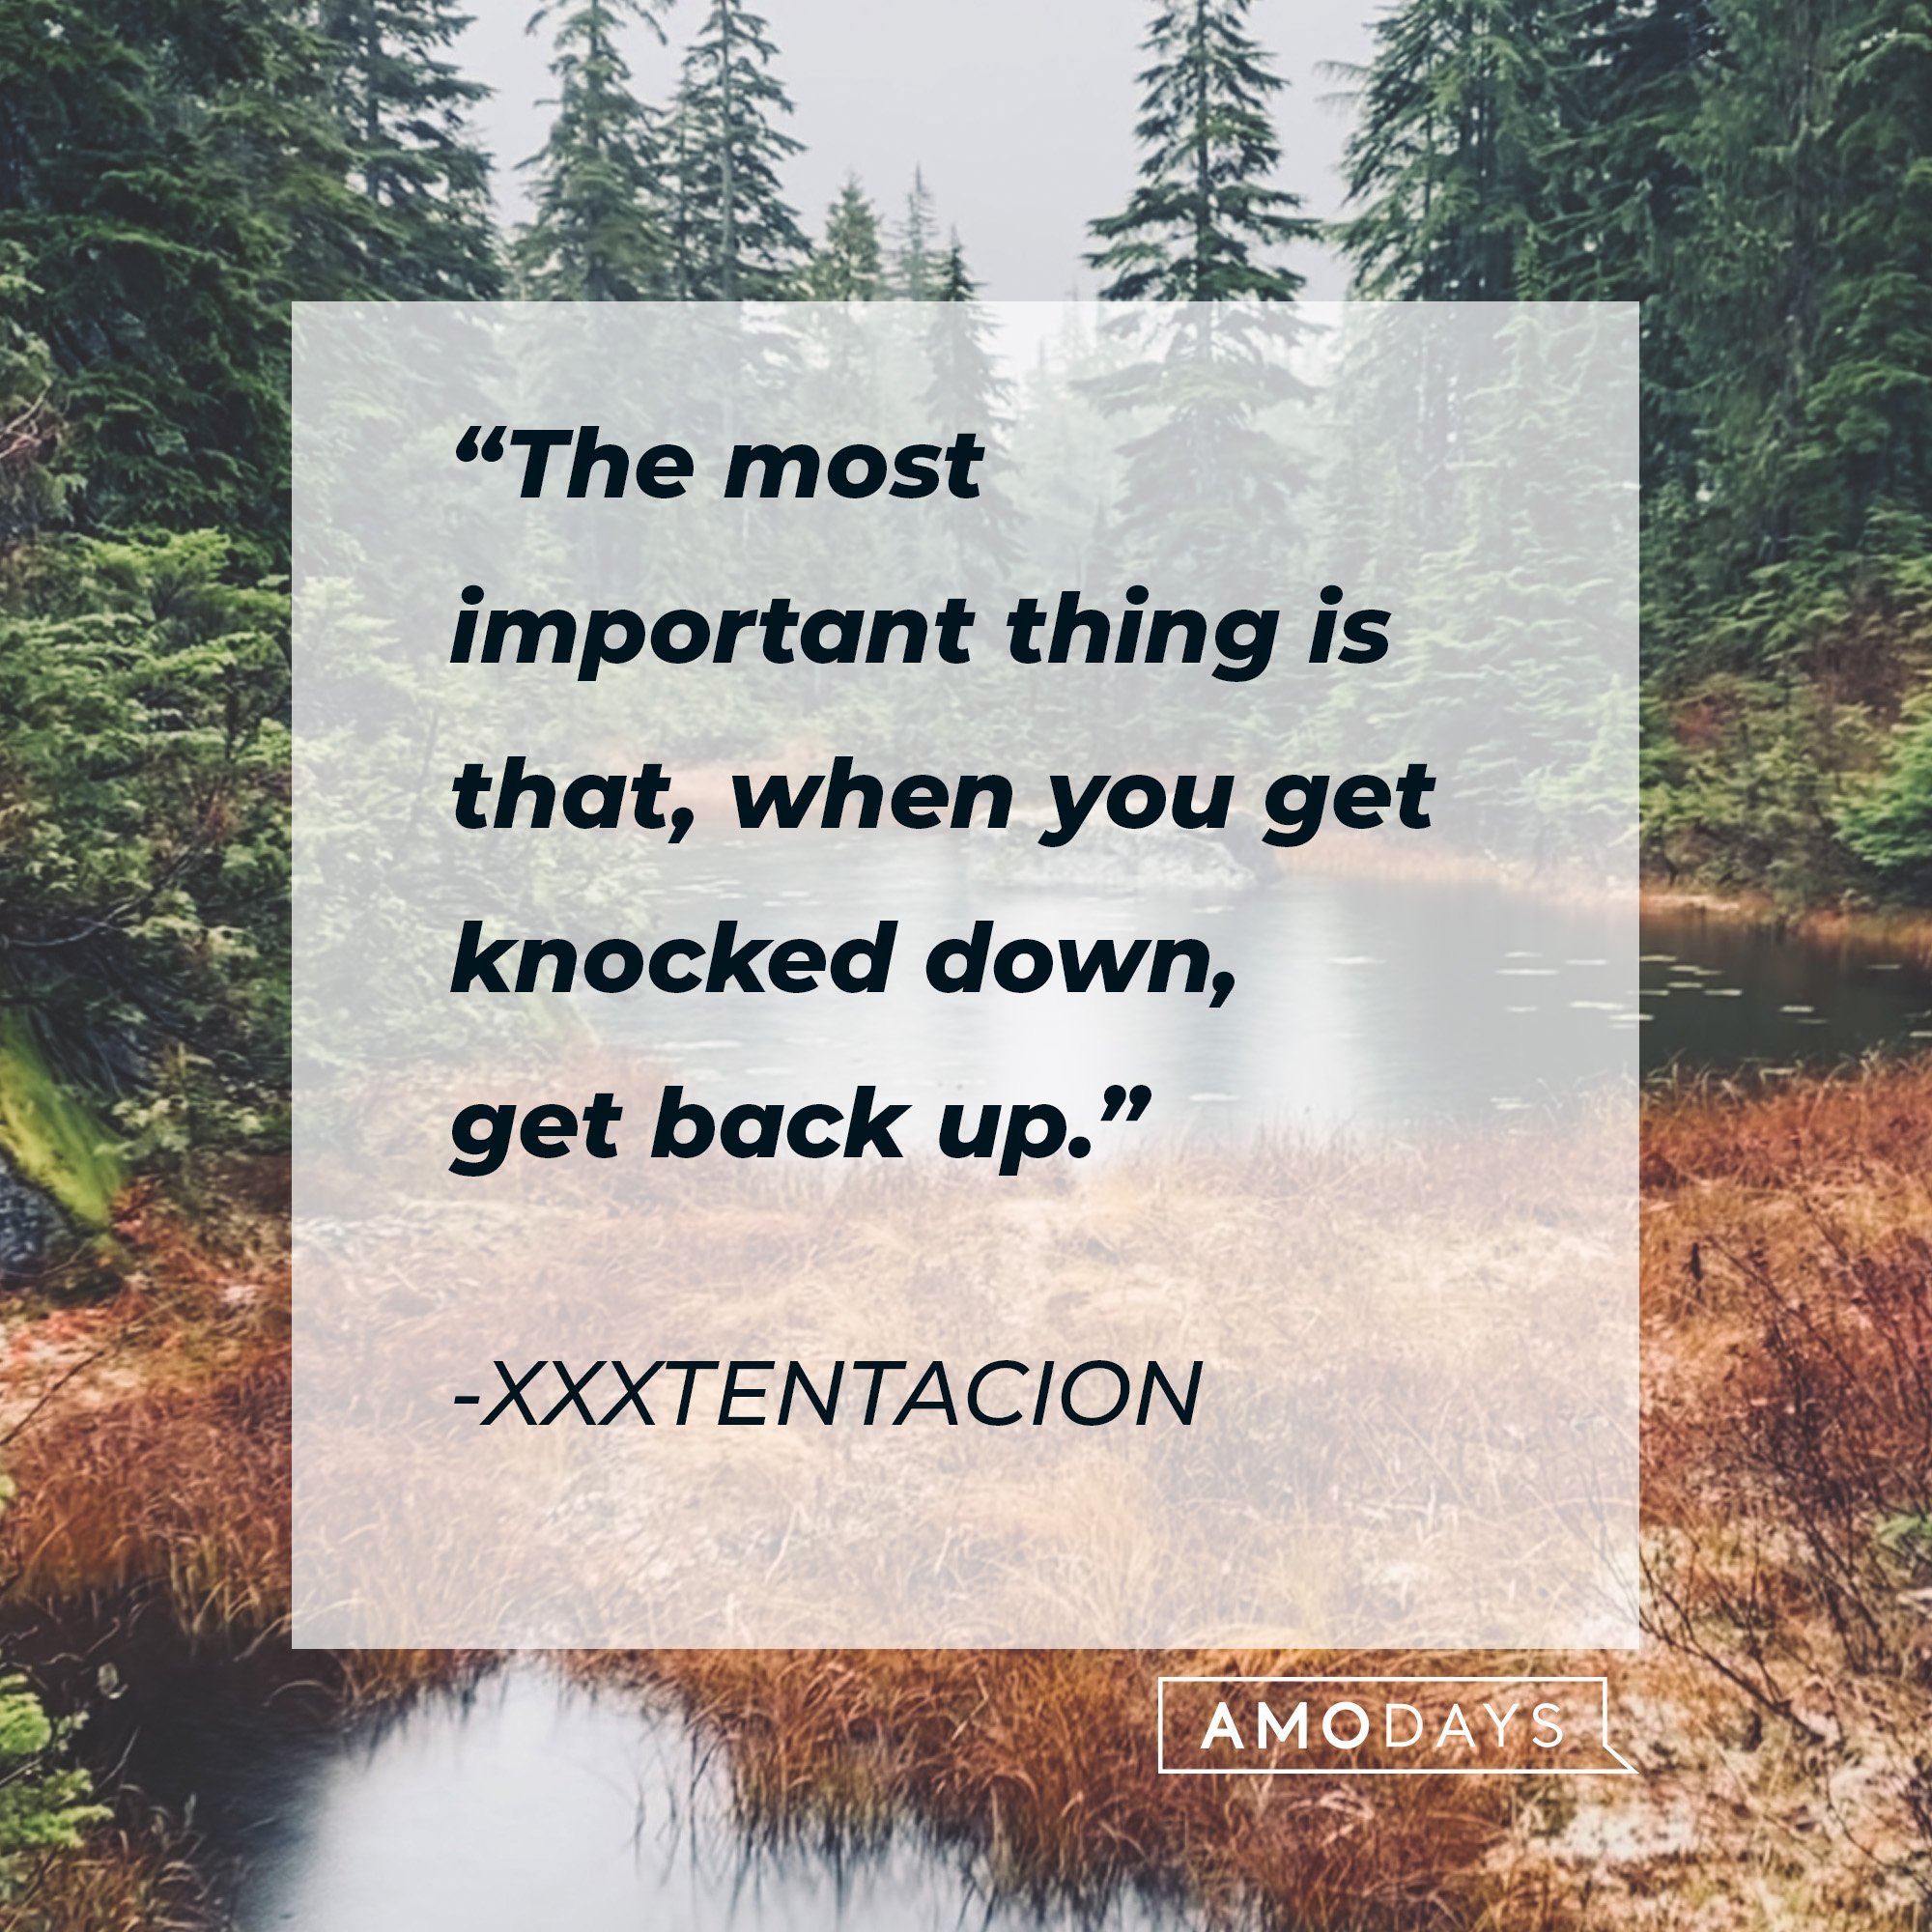 Xxxtentacion’s quote: “The most important thing is that, when you get knocked down, get back up.” | Image: AmoDays